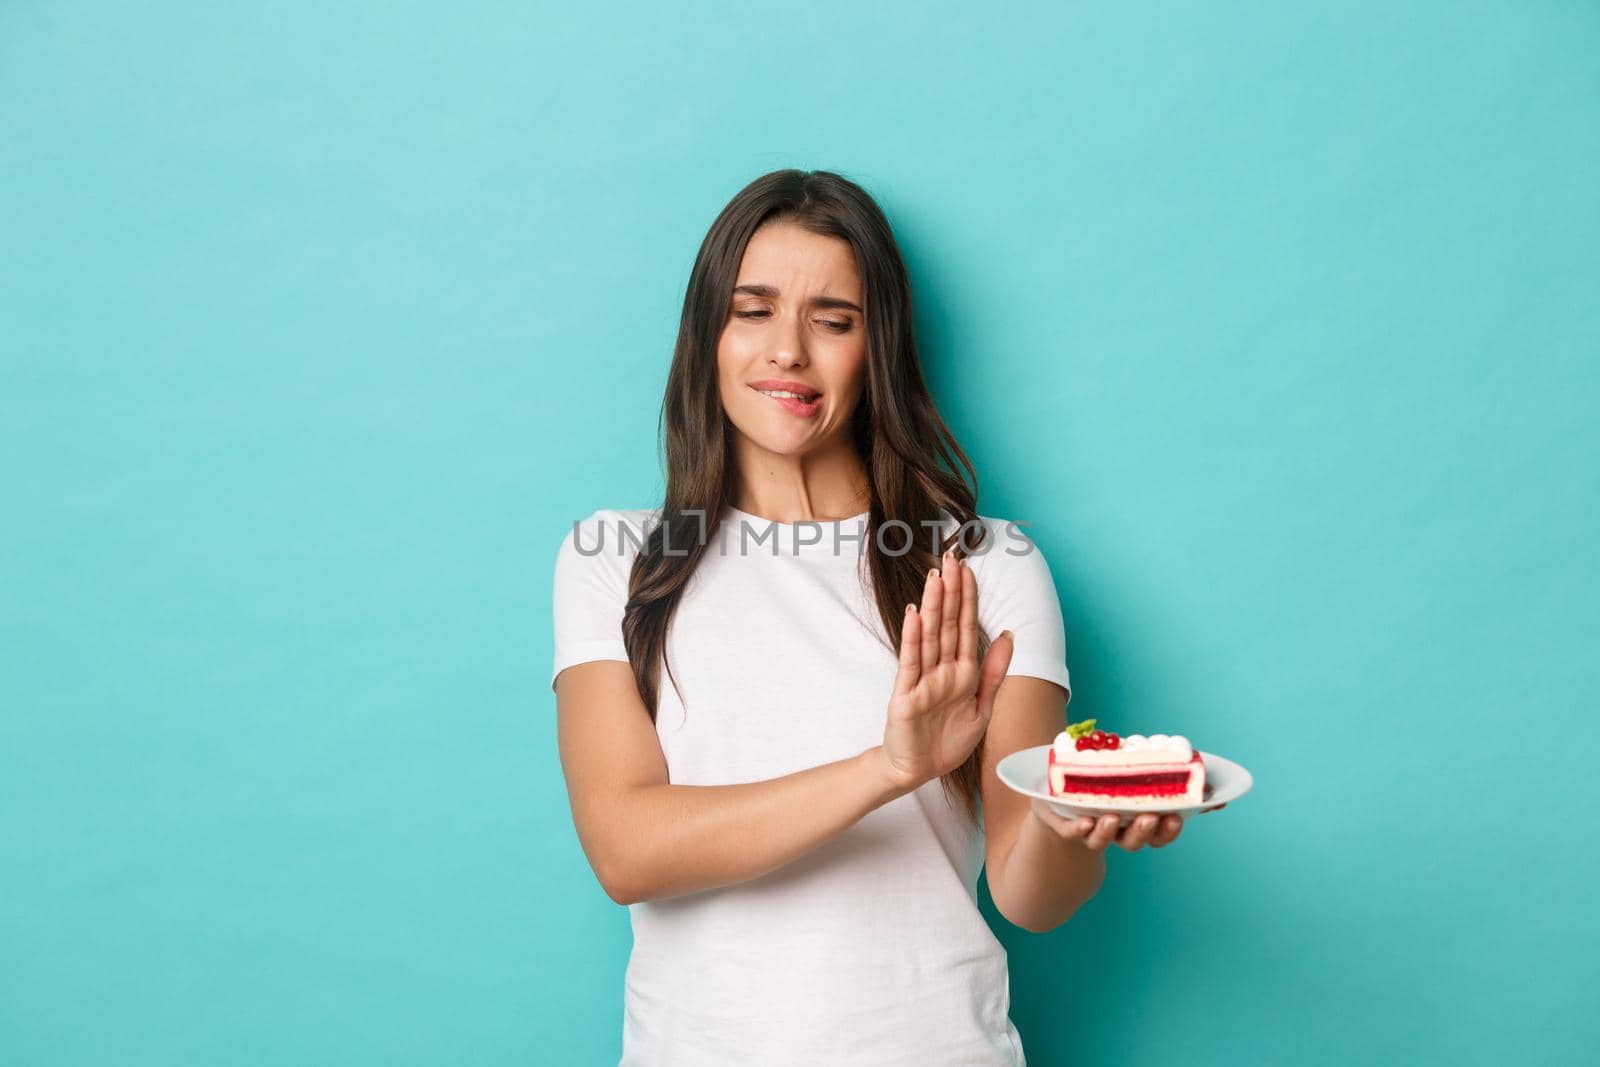 Image of cute girl on diet, tempted to eat cake but rejecting it, standing over blue background.